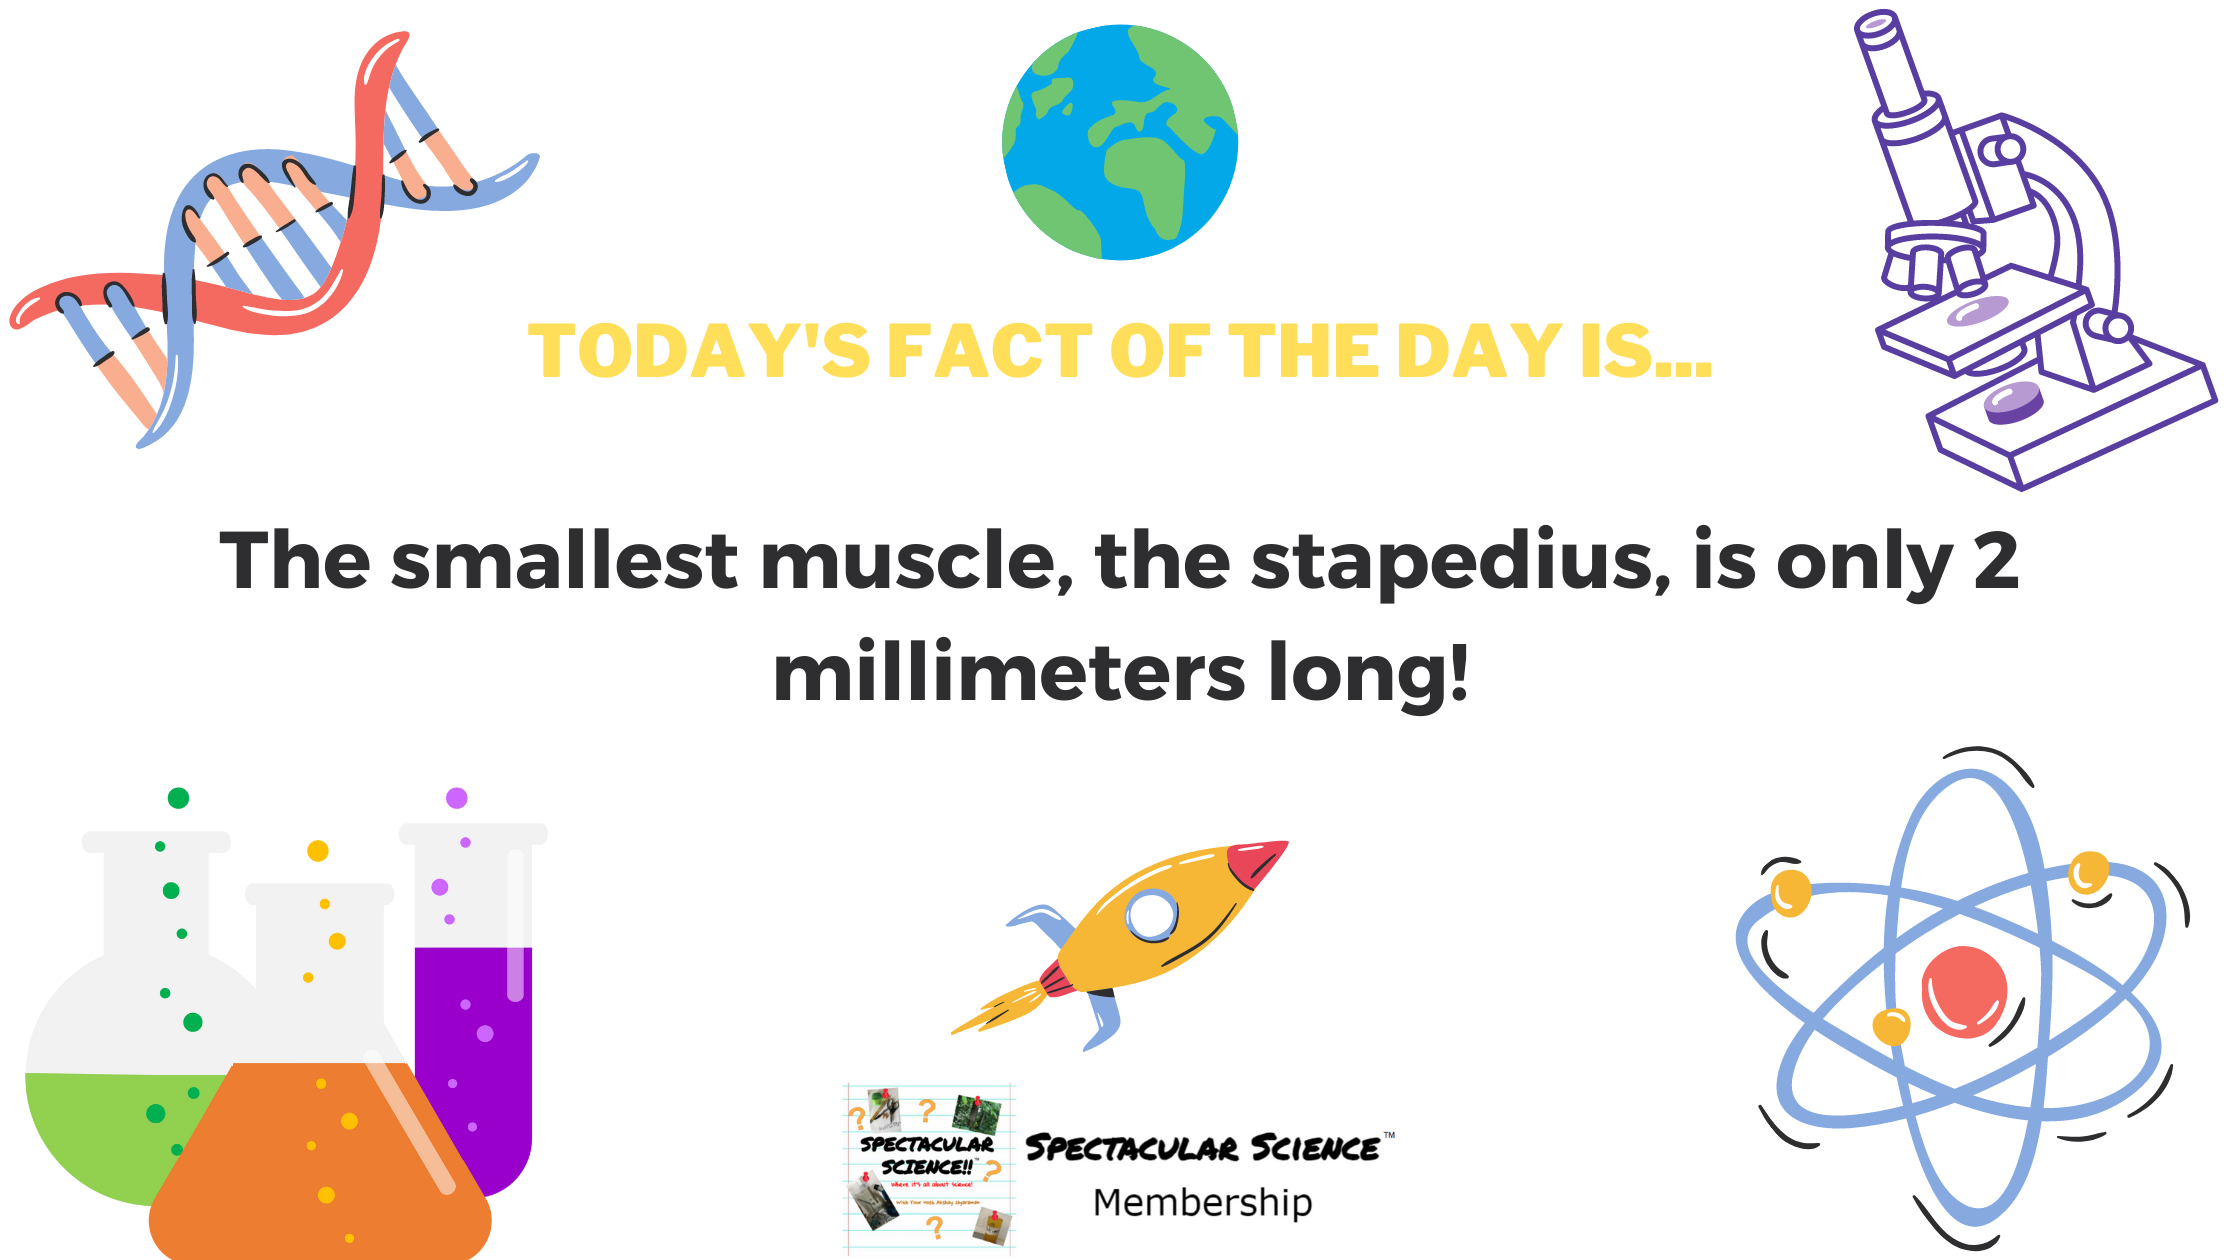 Fact of the Day Image Apr. 25th